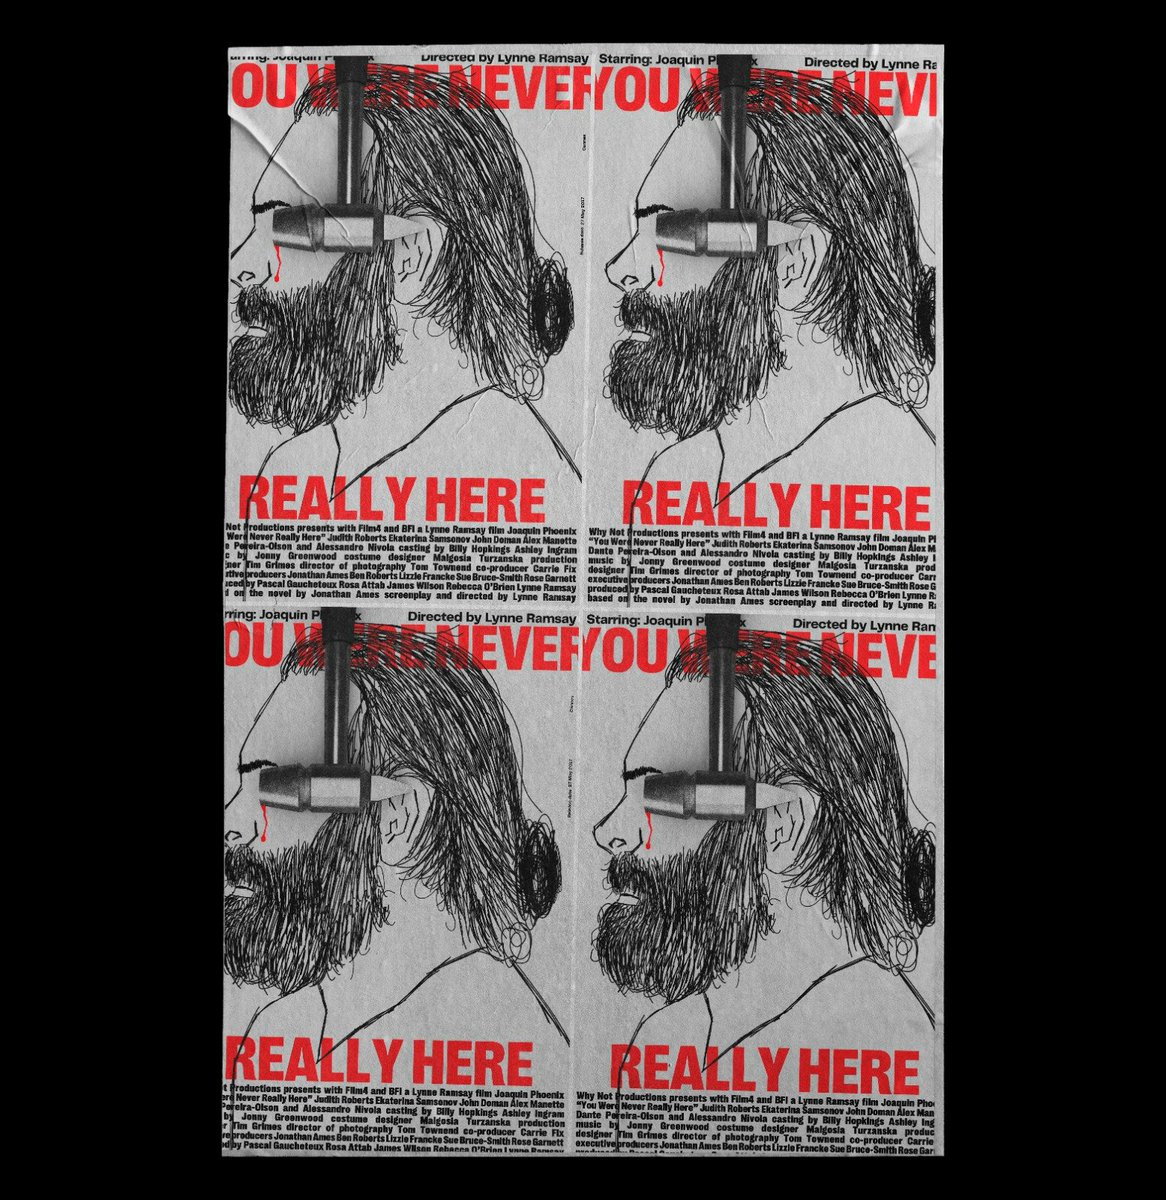 New alt. movie poster for You Were Never Really Here #youwereneverreallyhere #lynneramsay #JoaquinPhoenix #movieposter #alternativemovieposter